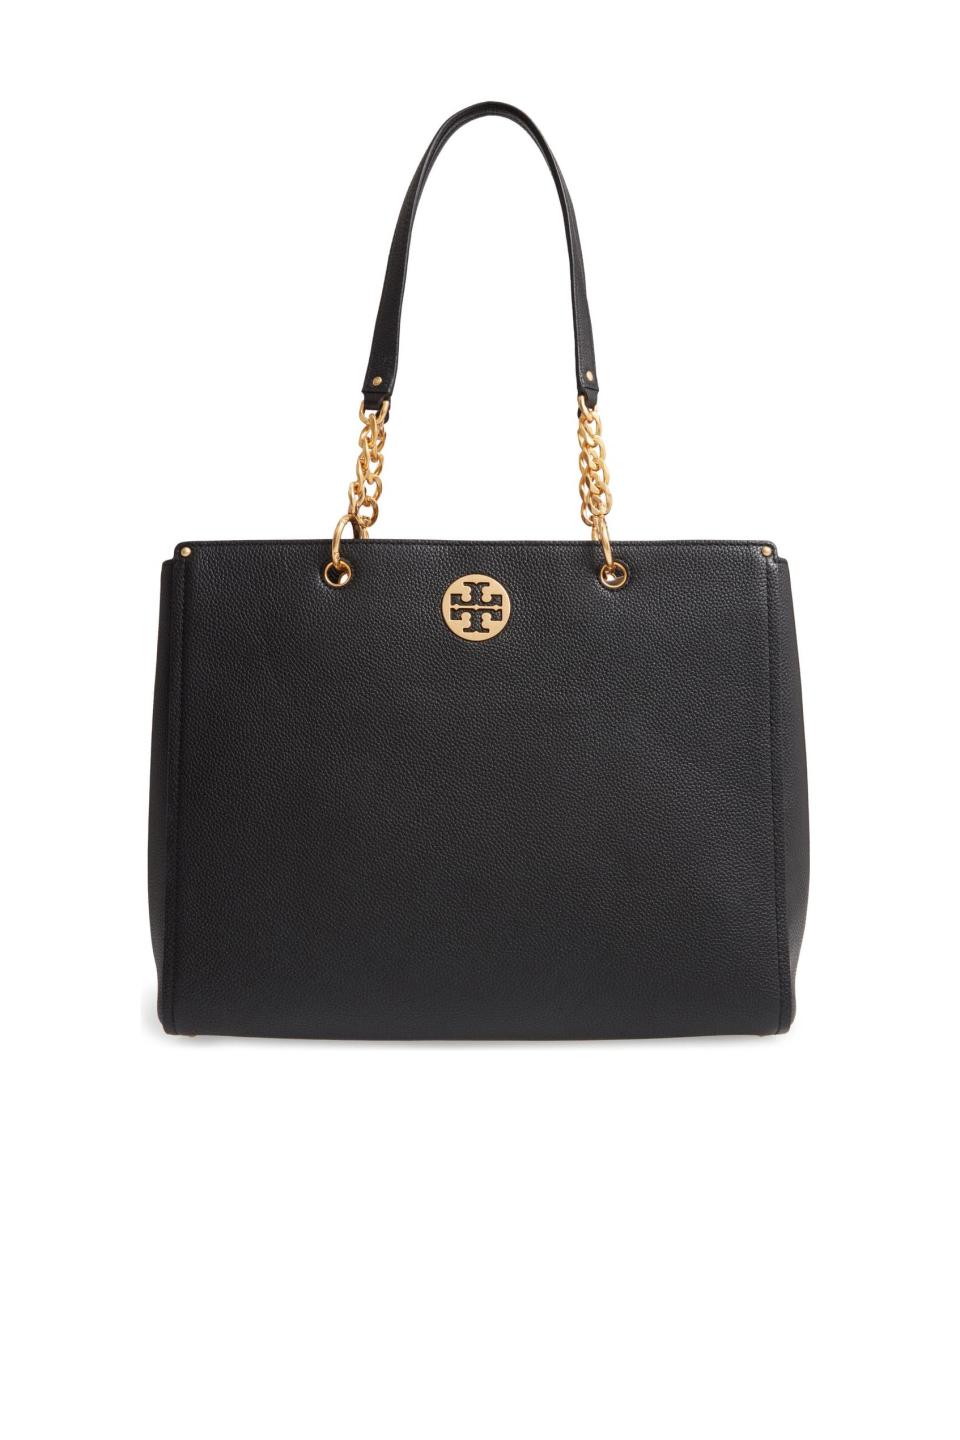 Everly Leather Tote